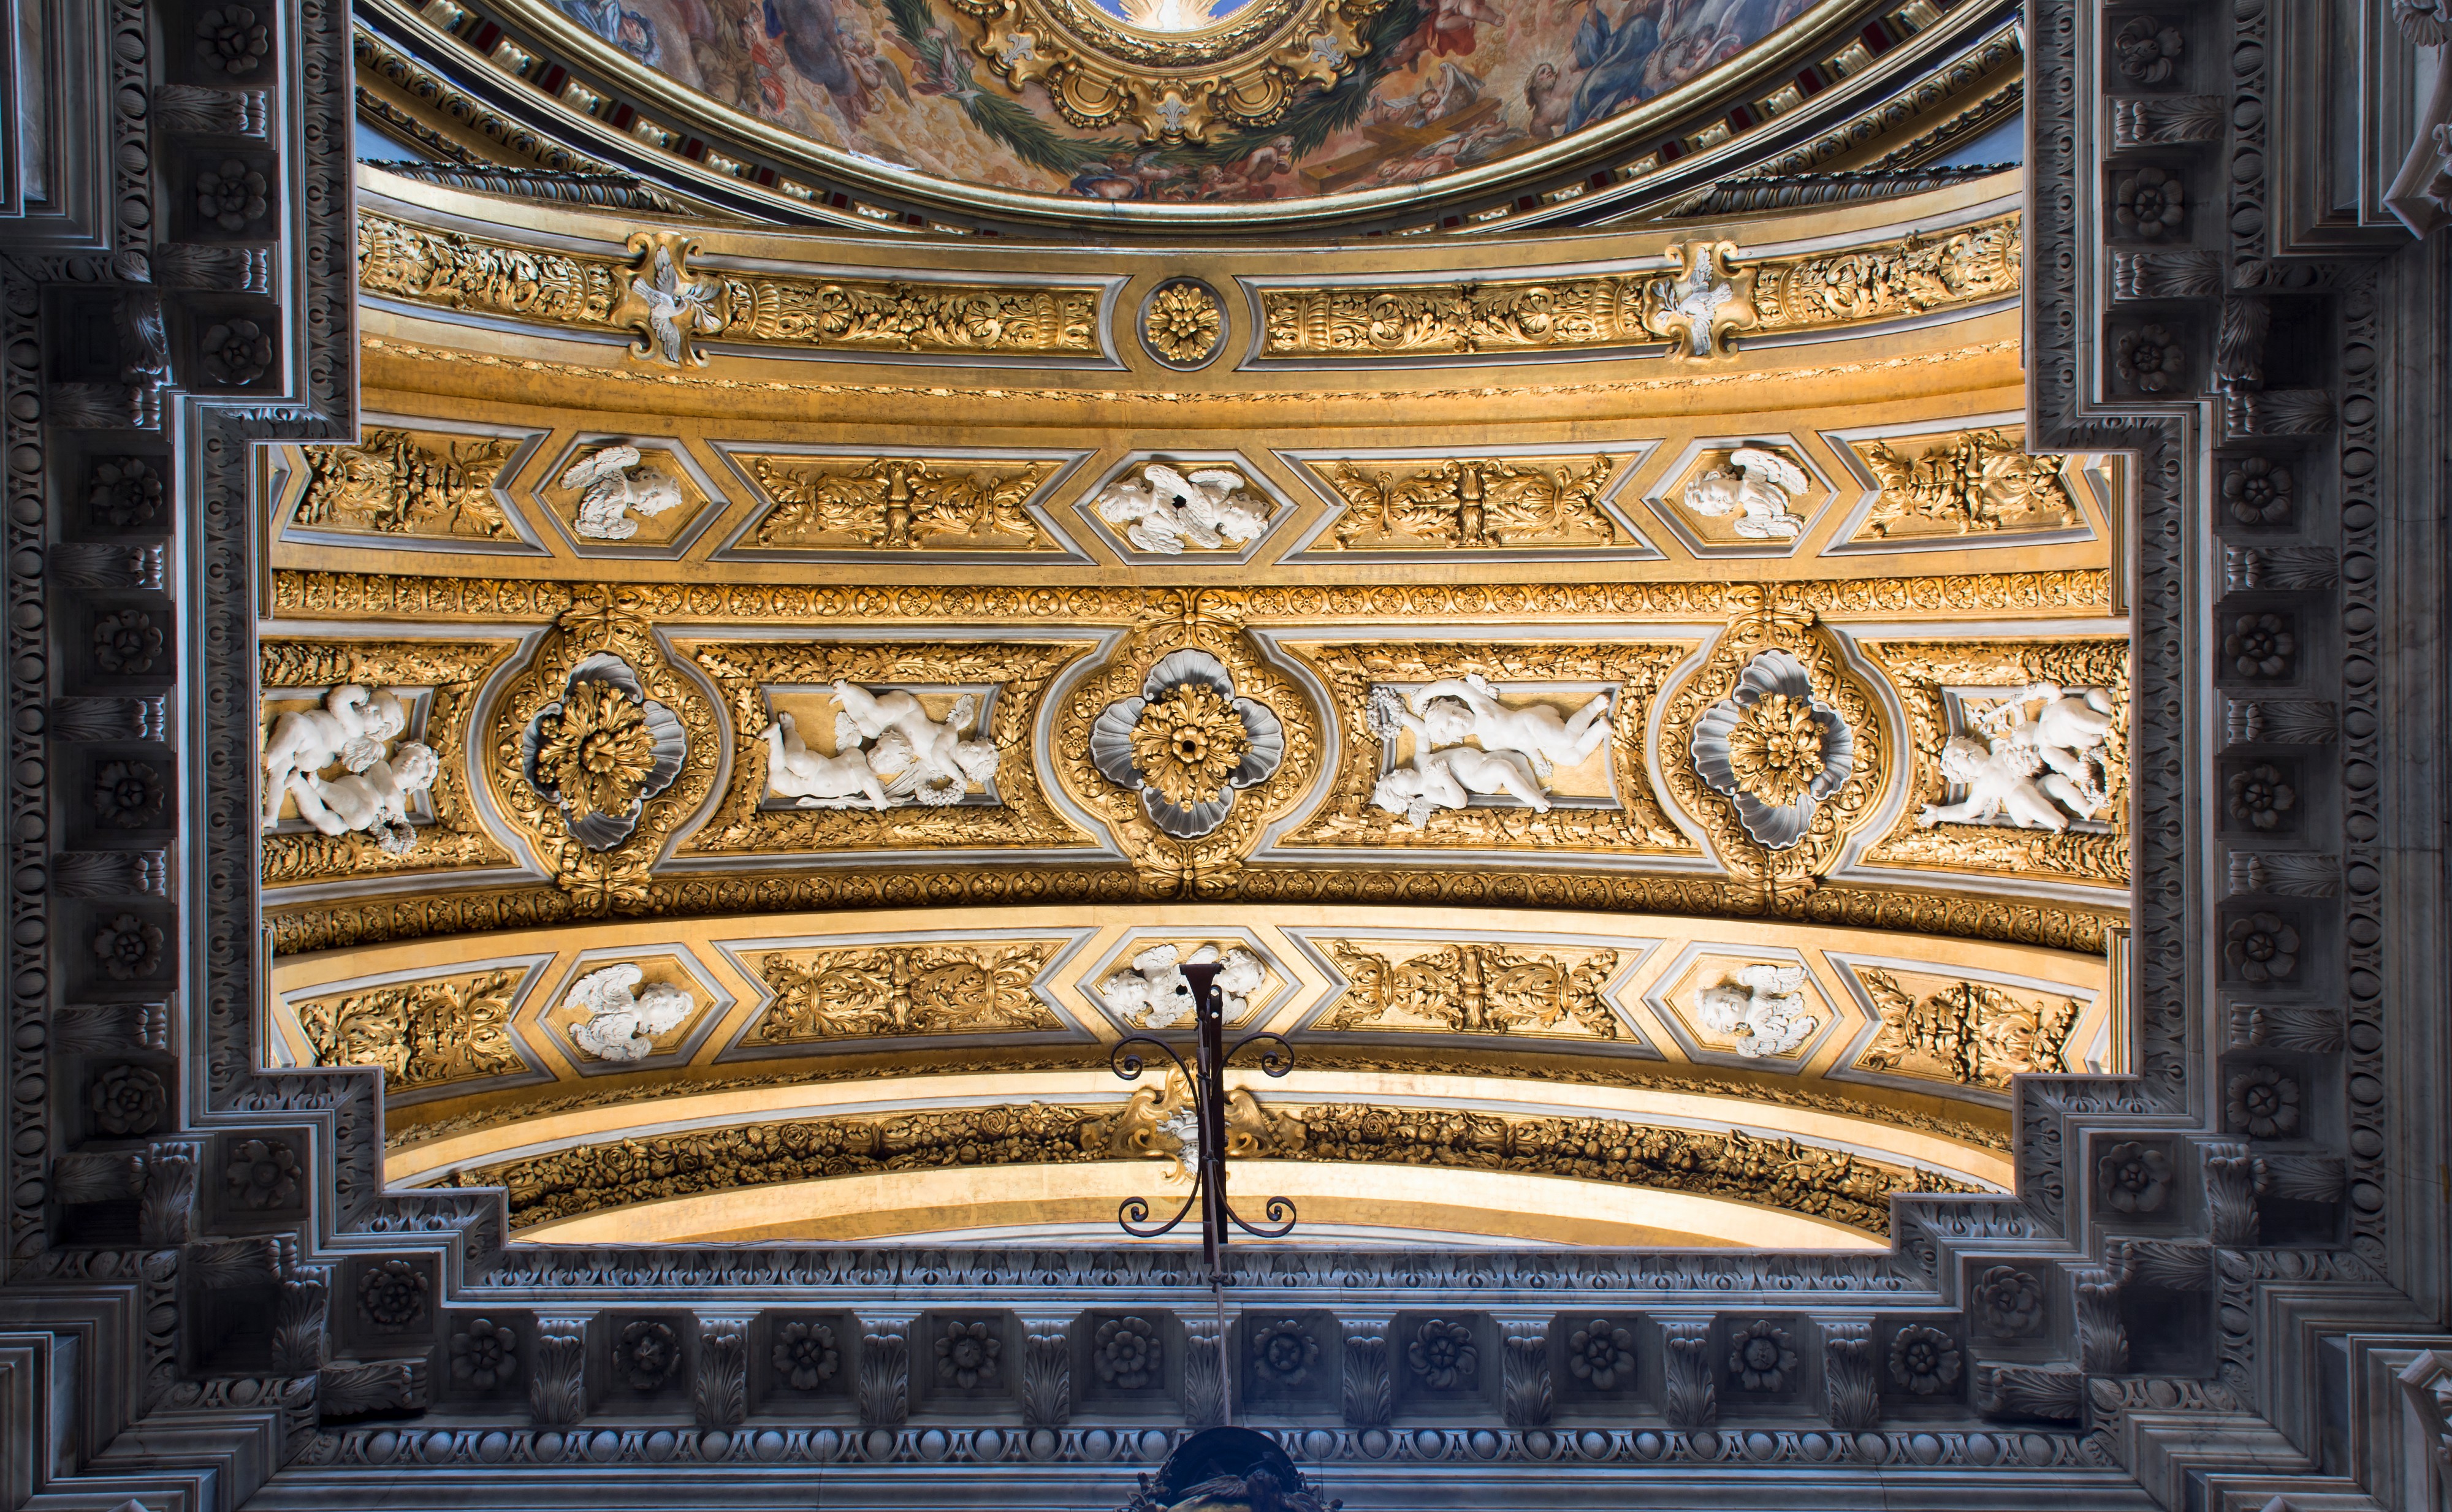 Ceiling decoration of the chapel Sant'Agnese in Agone (Roma)